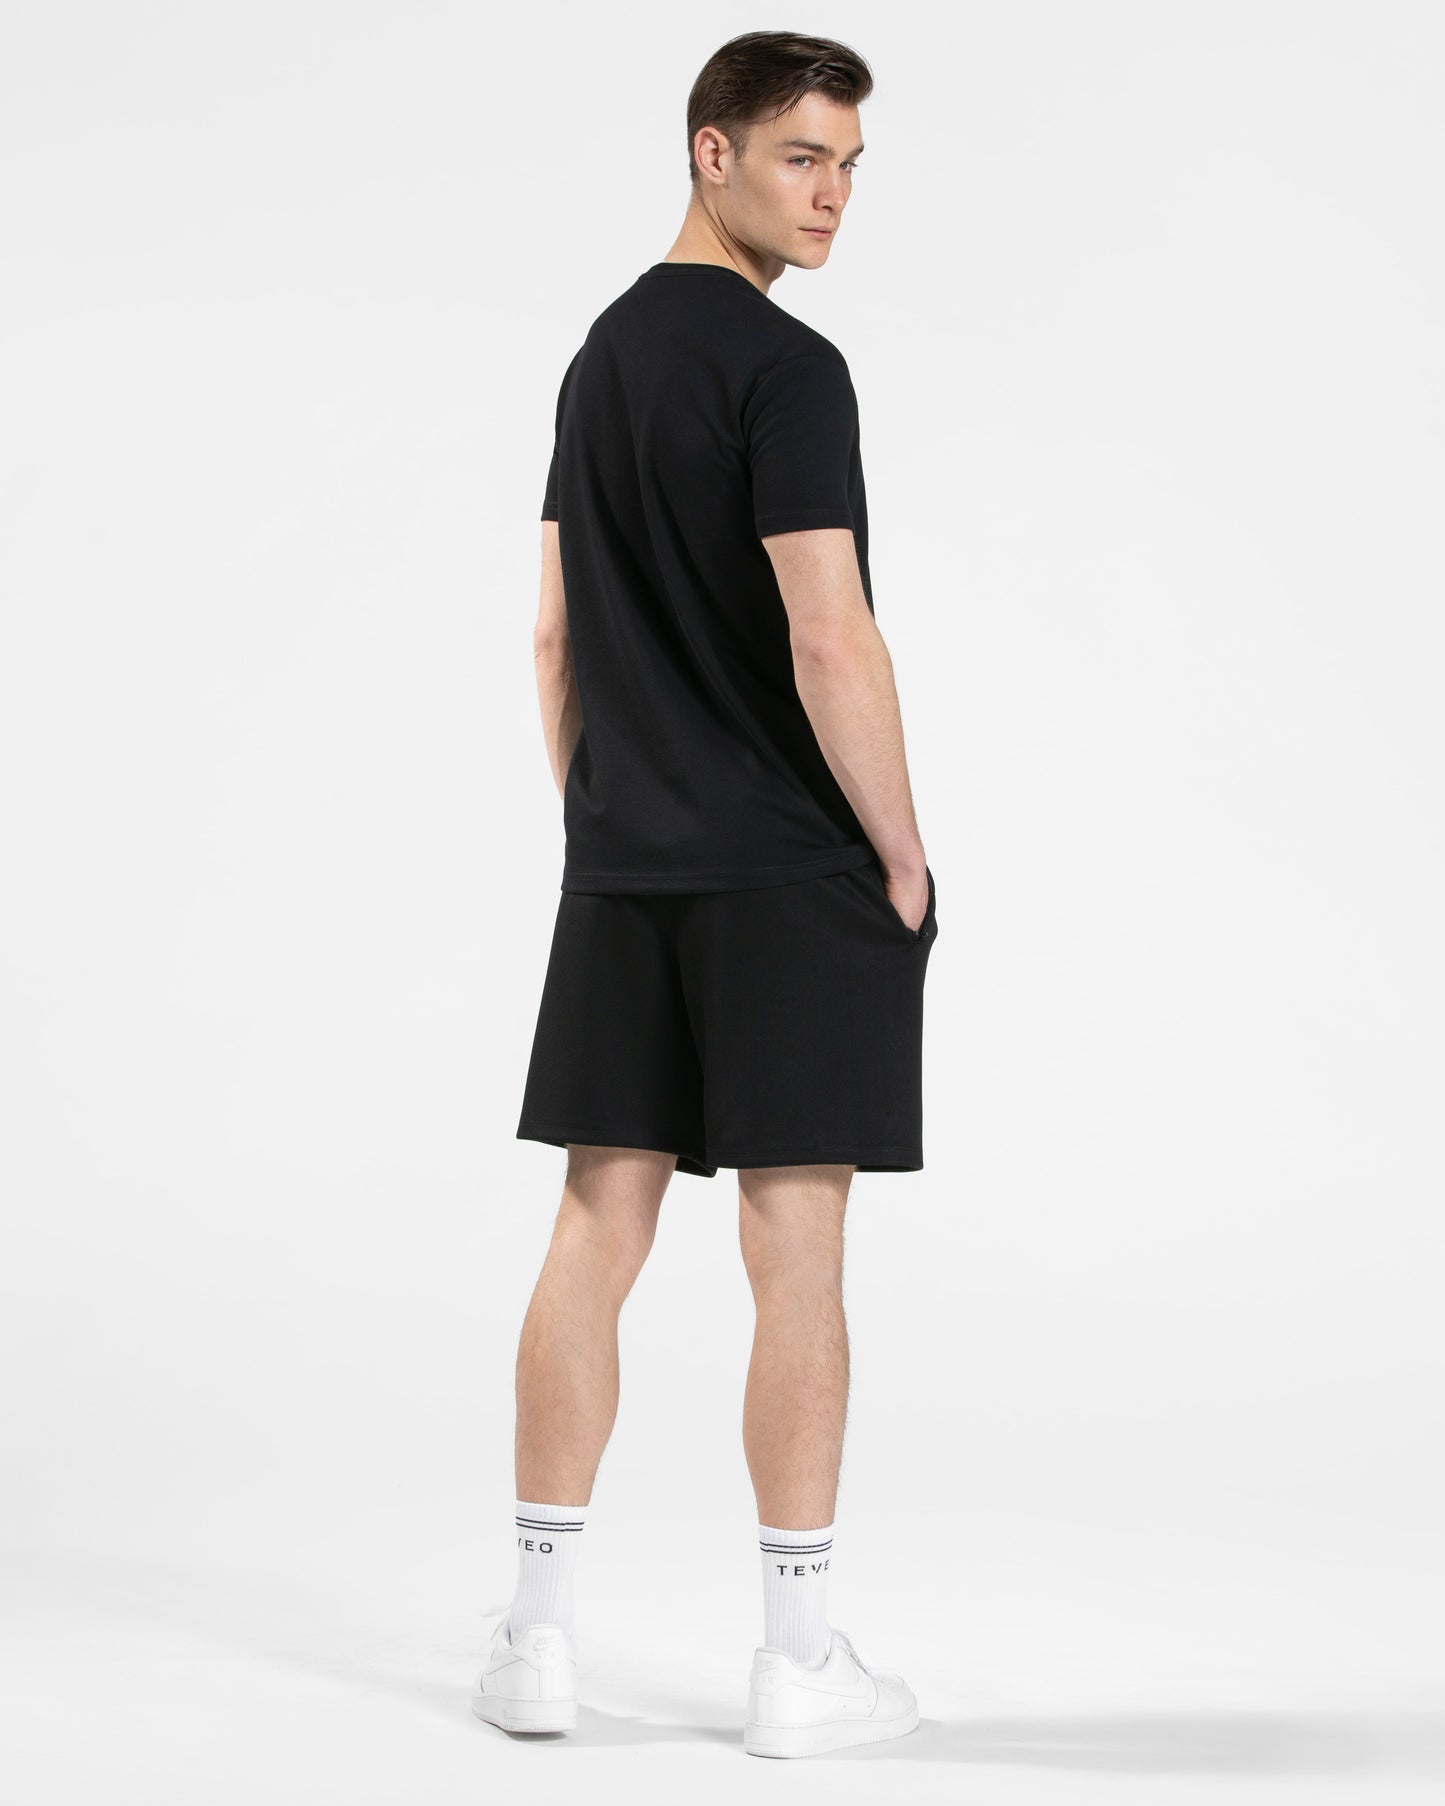 Arrival Fitted T-Shirt "Schwarz"